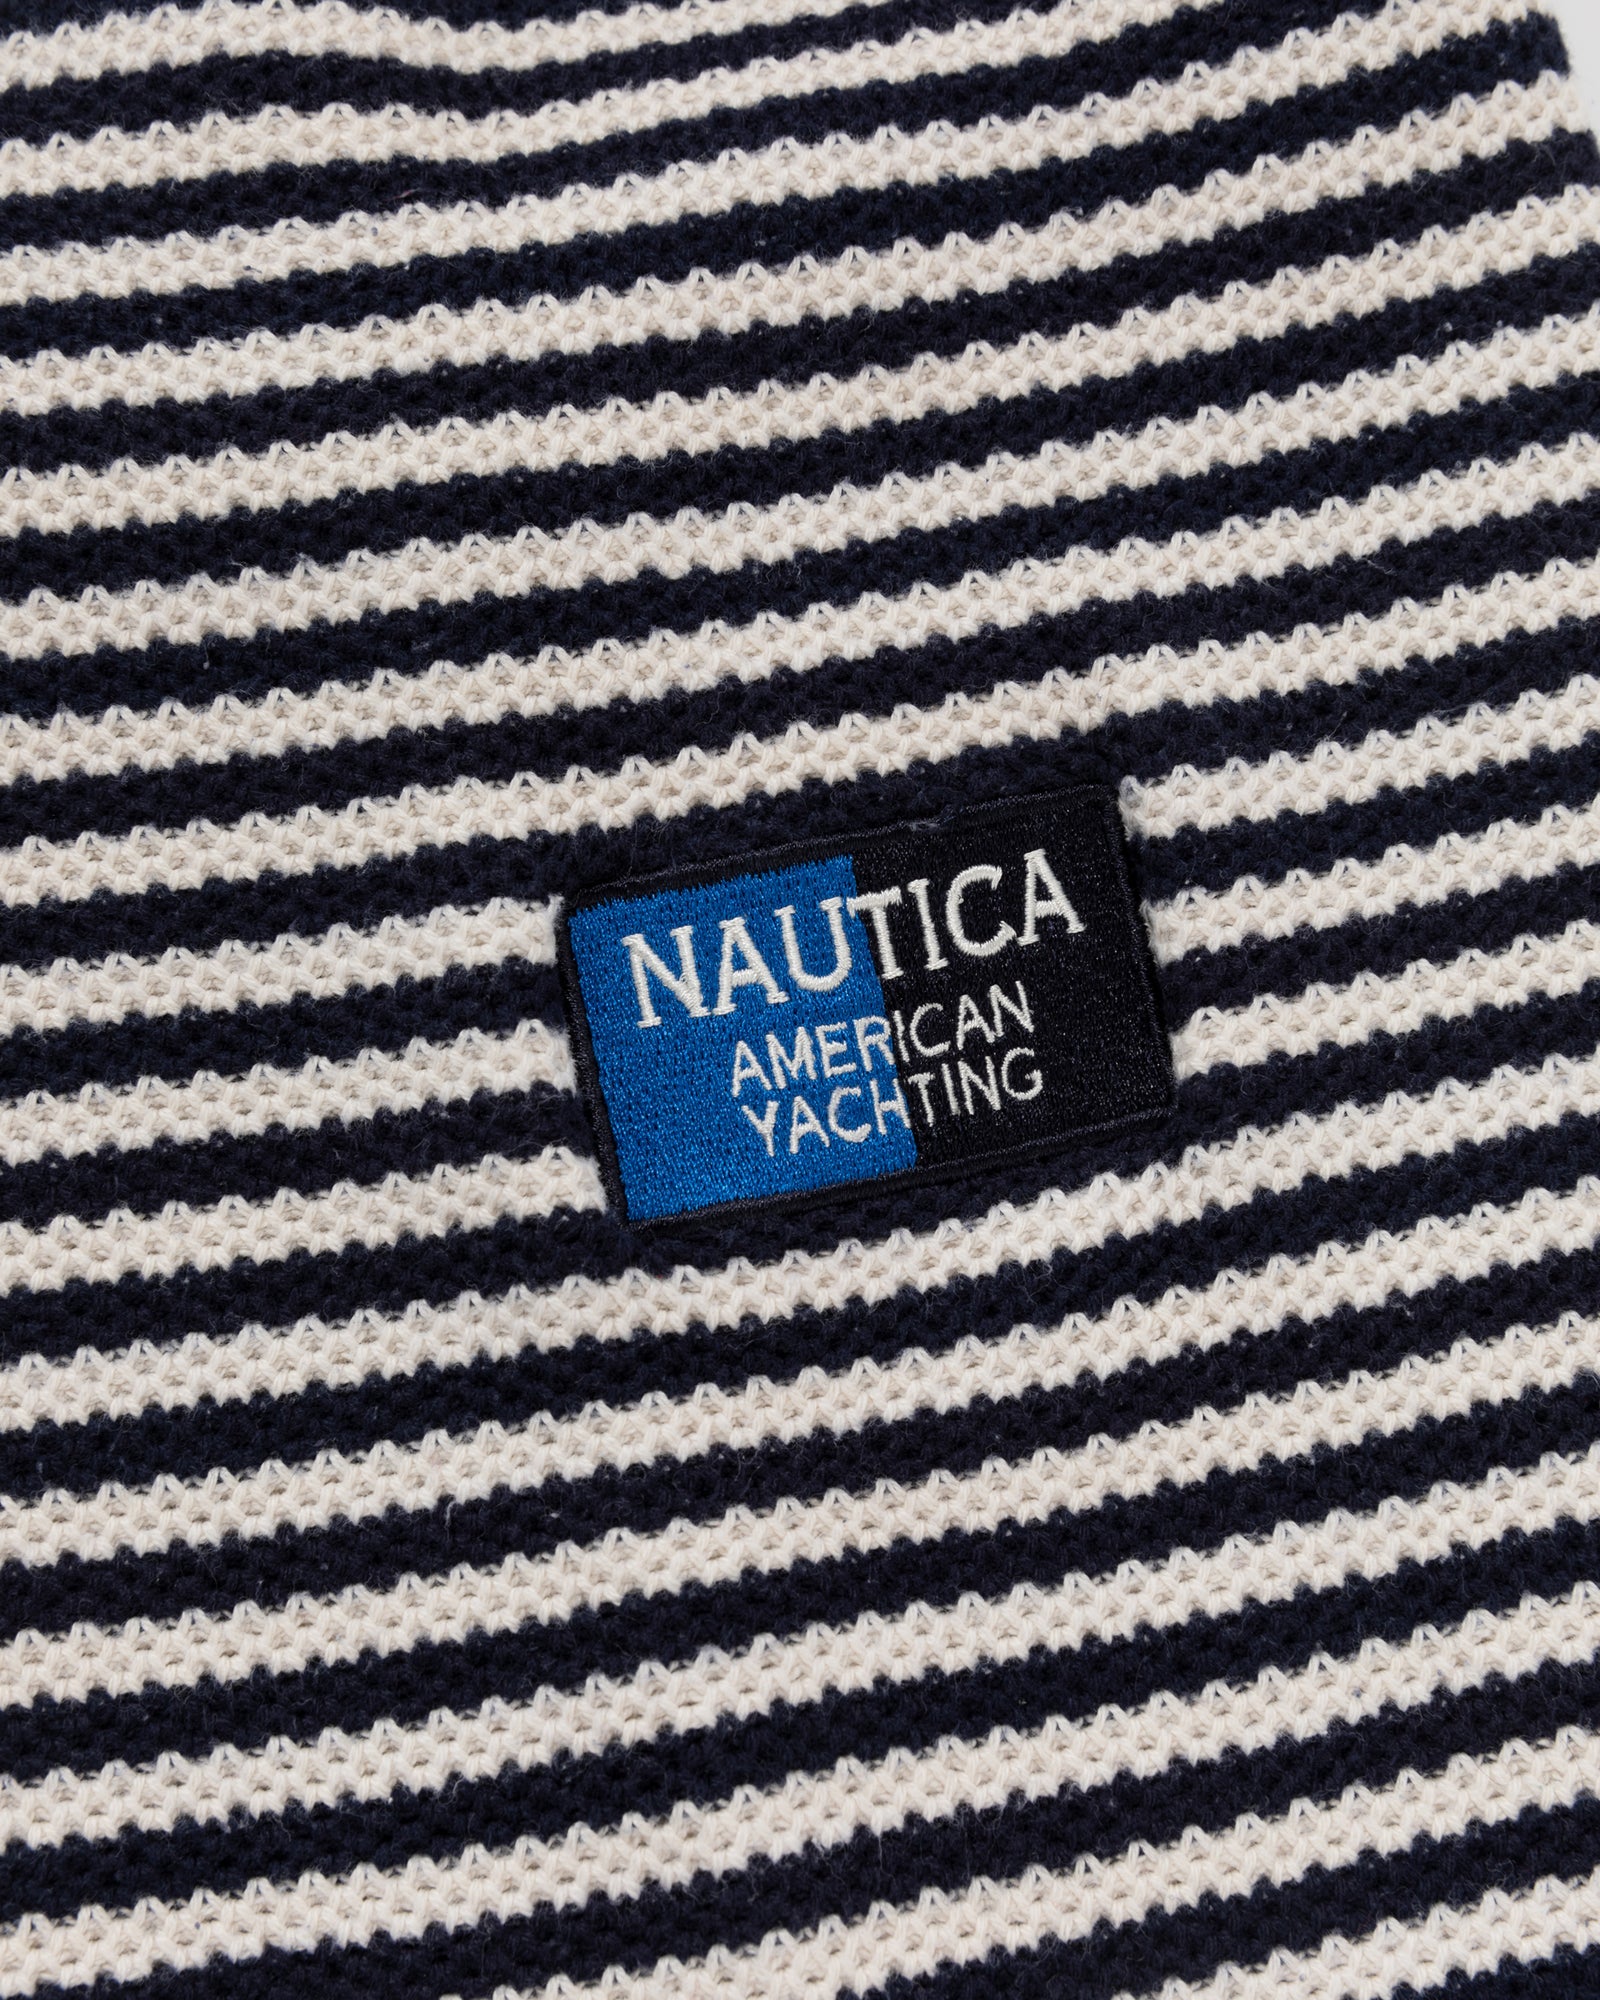 Vintage Nautica Collared Knit Sweater